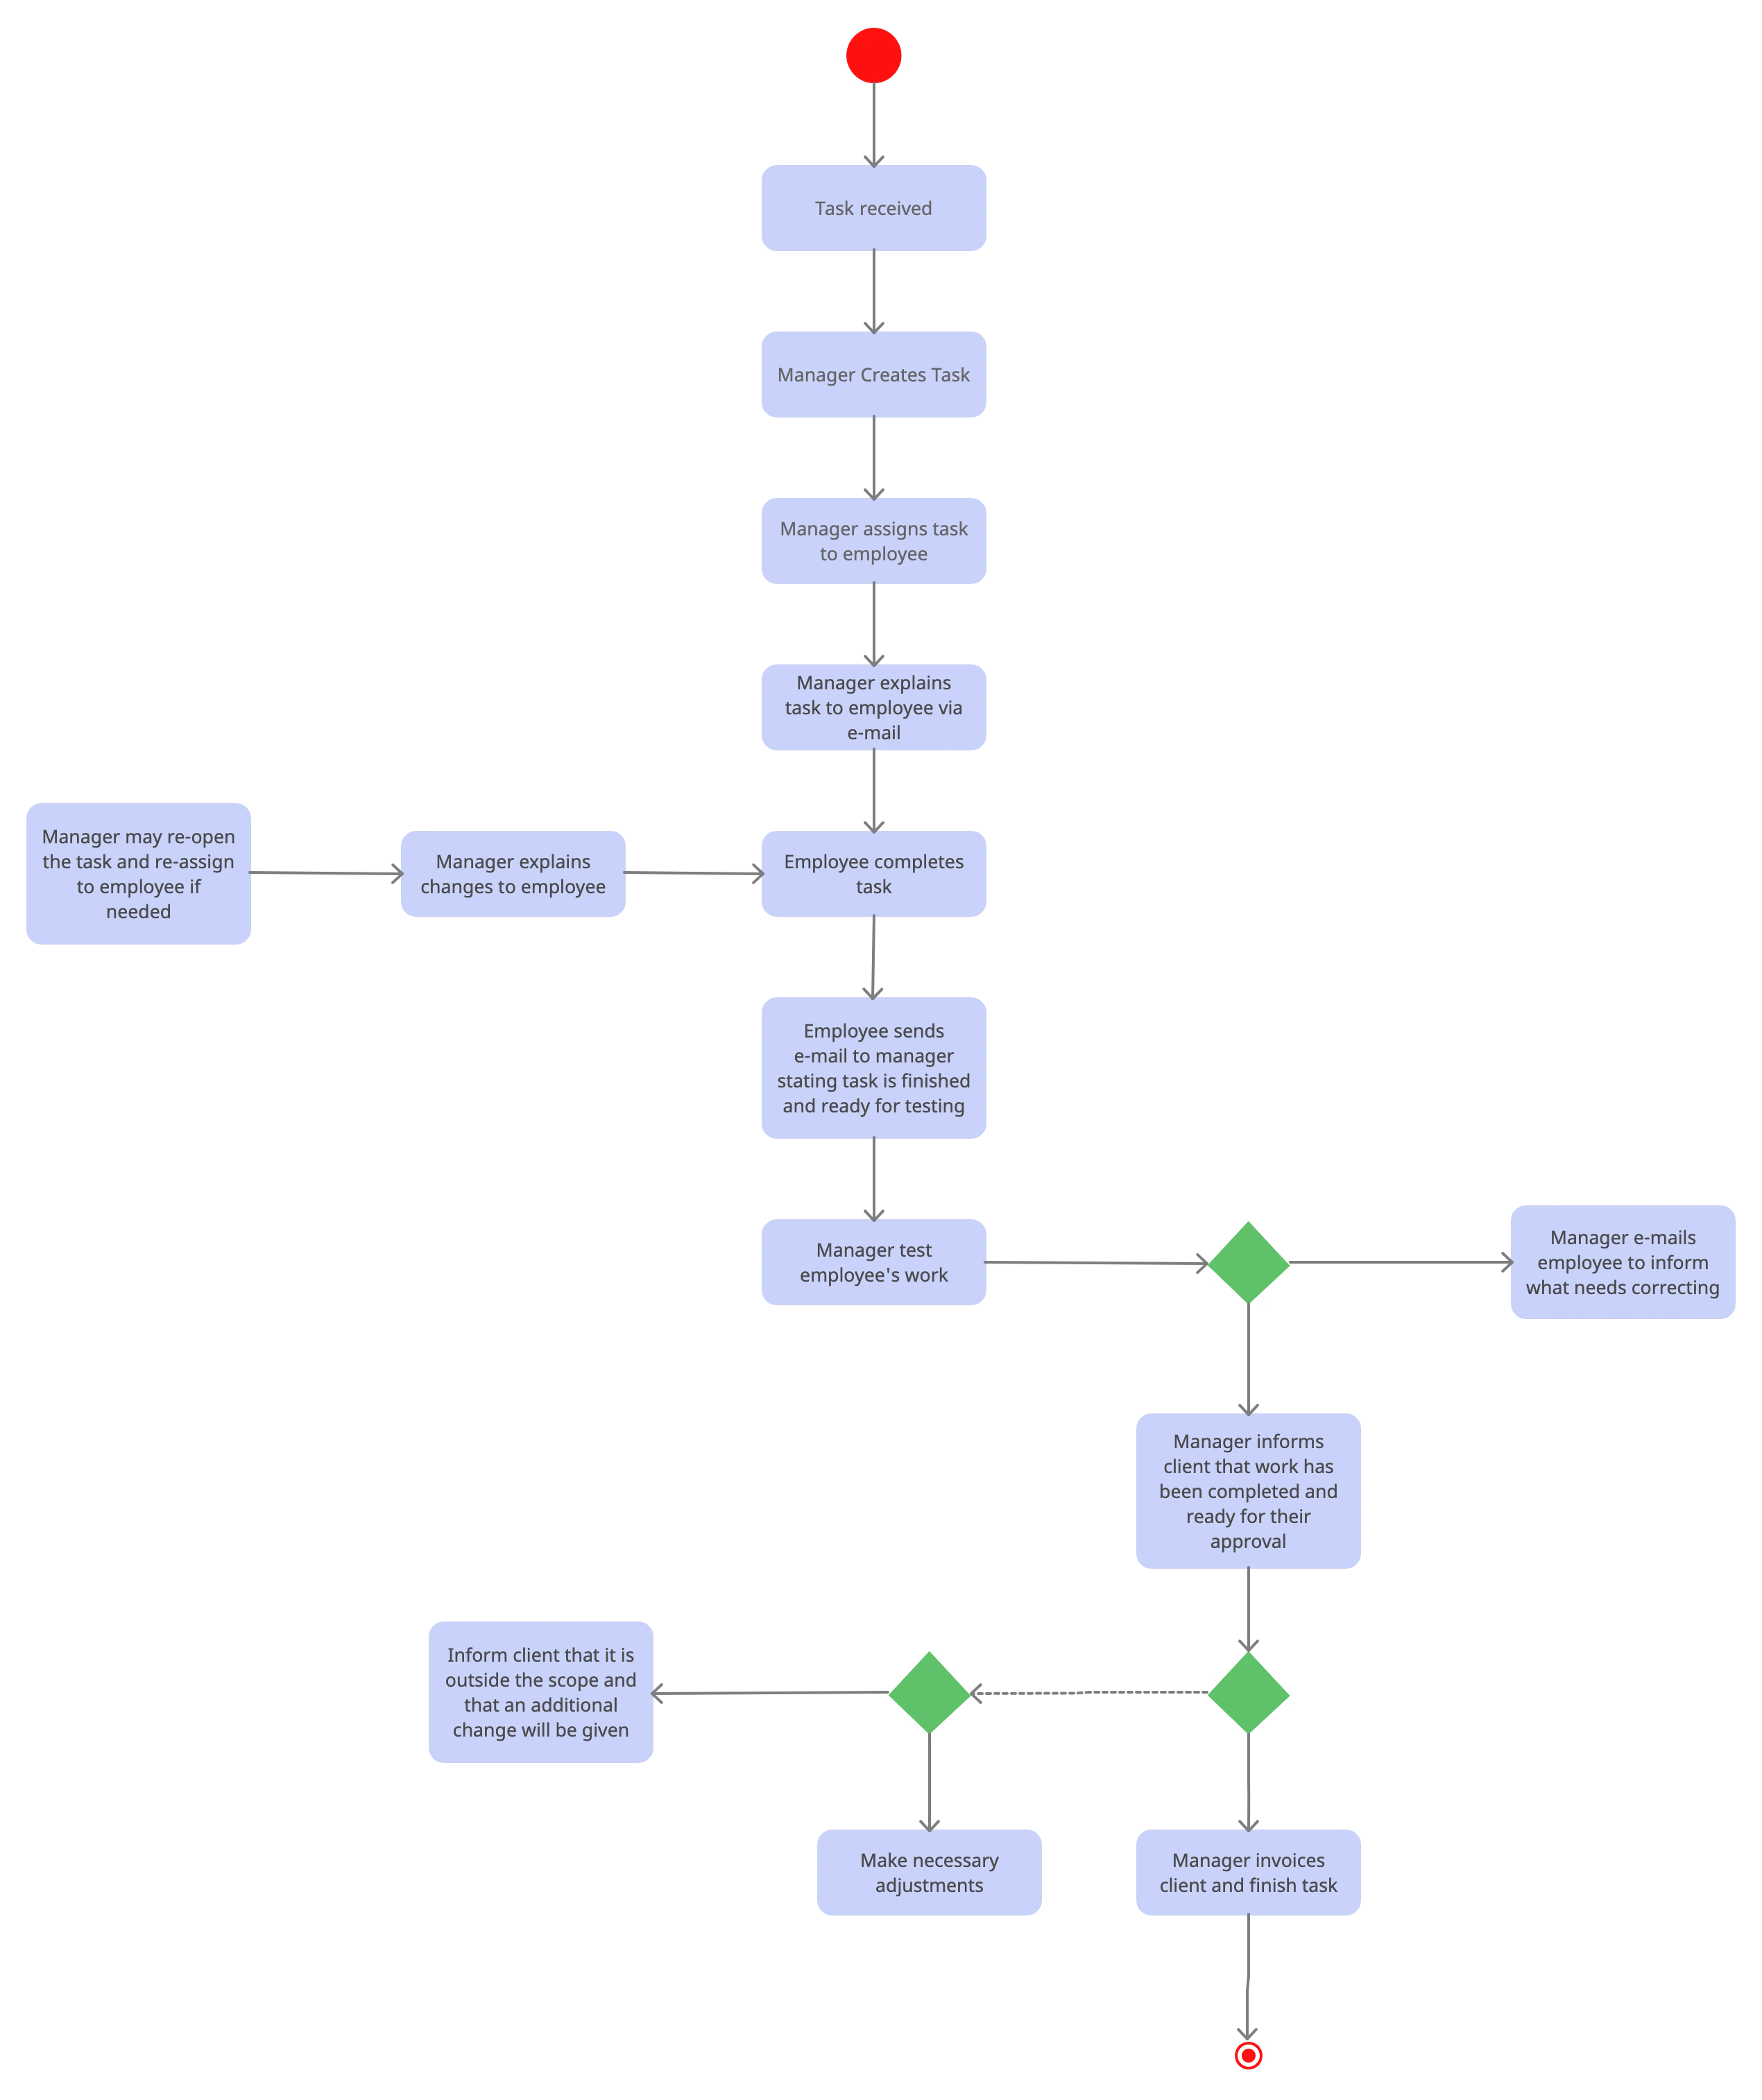 Activity Diagram for a Project Management System